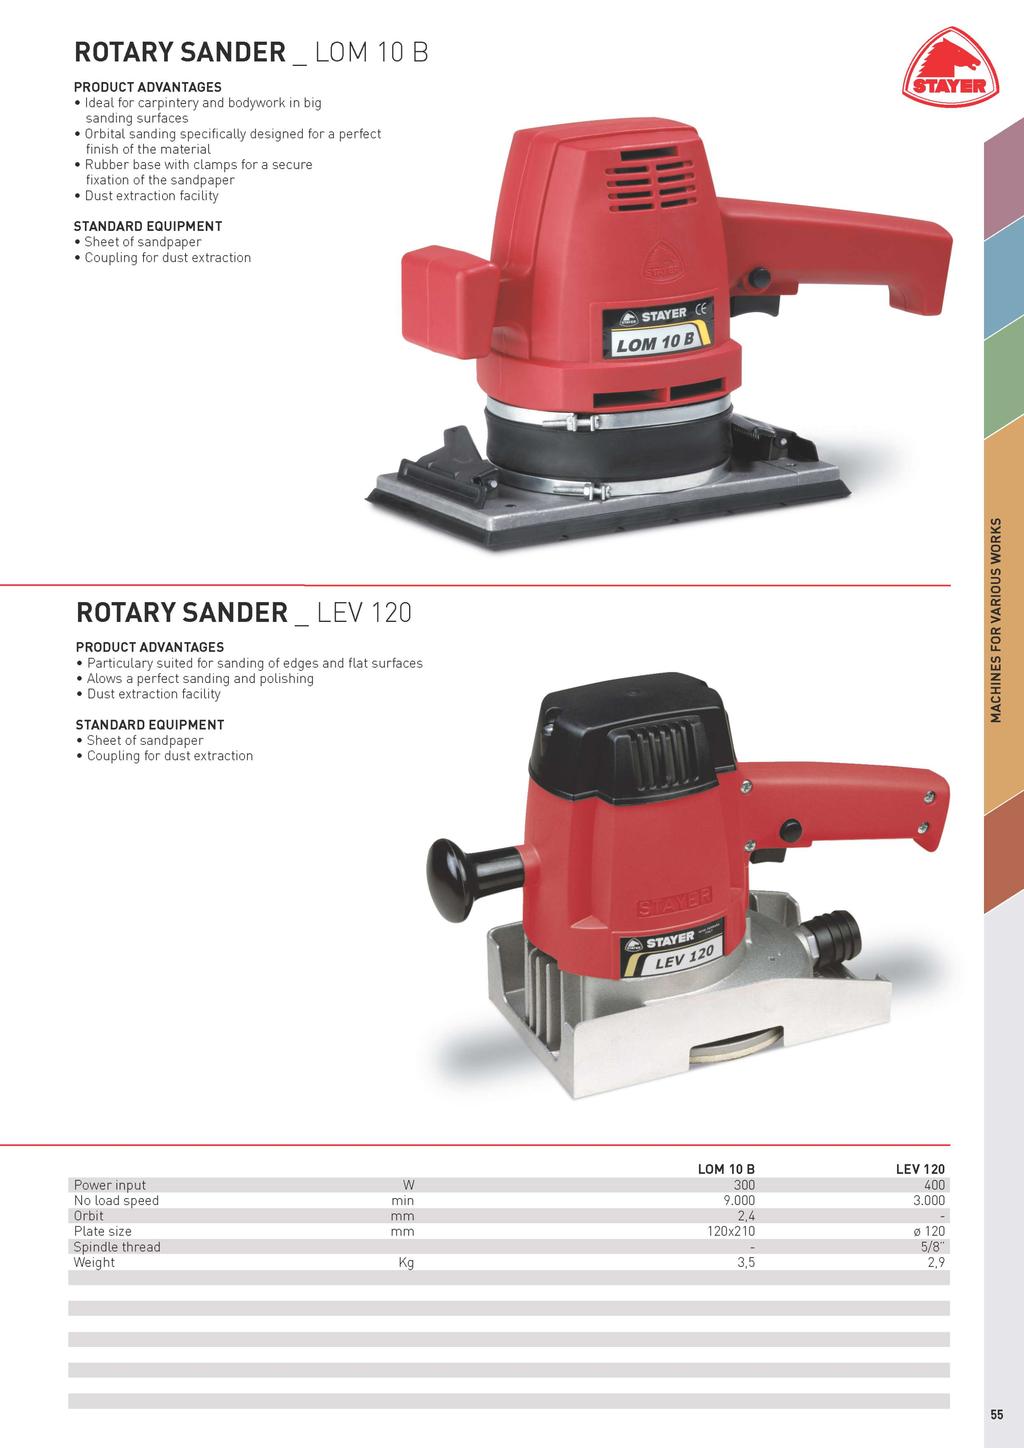 ROTARY SANDER LOM 10 B Ideal for carpintery and bodywork in big sanding surfaces Orbital sanding specifically designed for a perfect finish of the material Rubber base with clamps for a secure